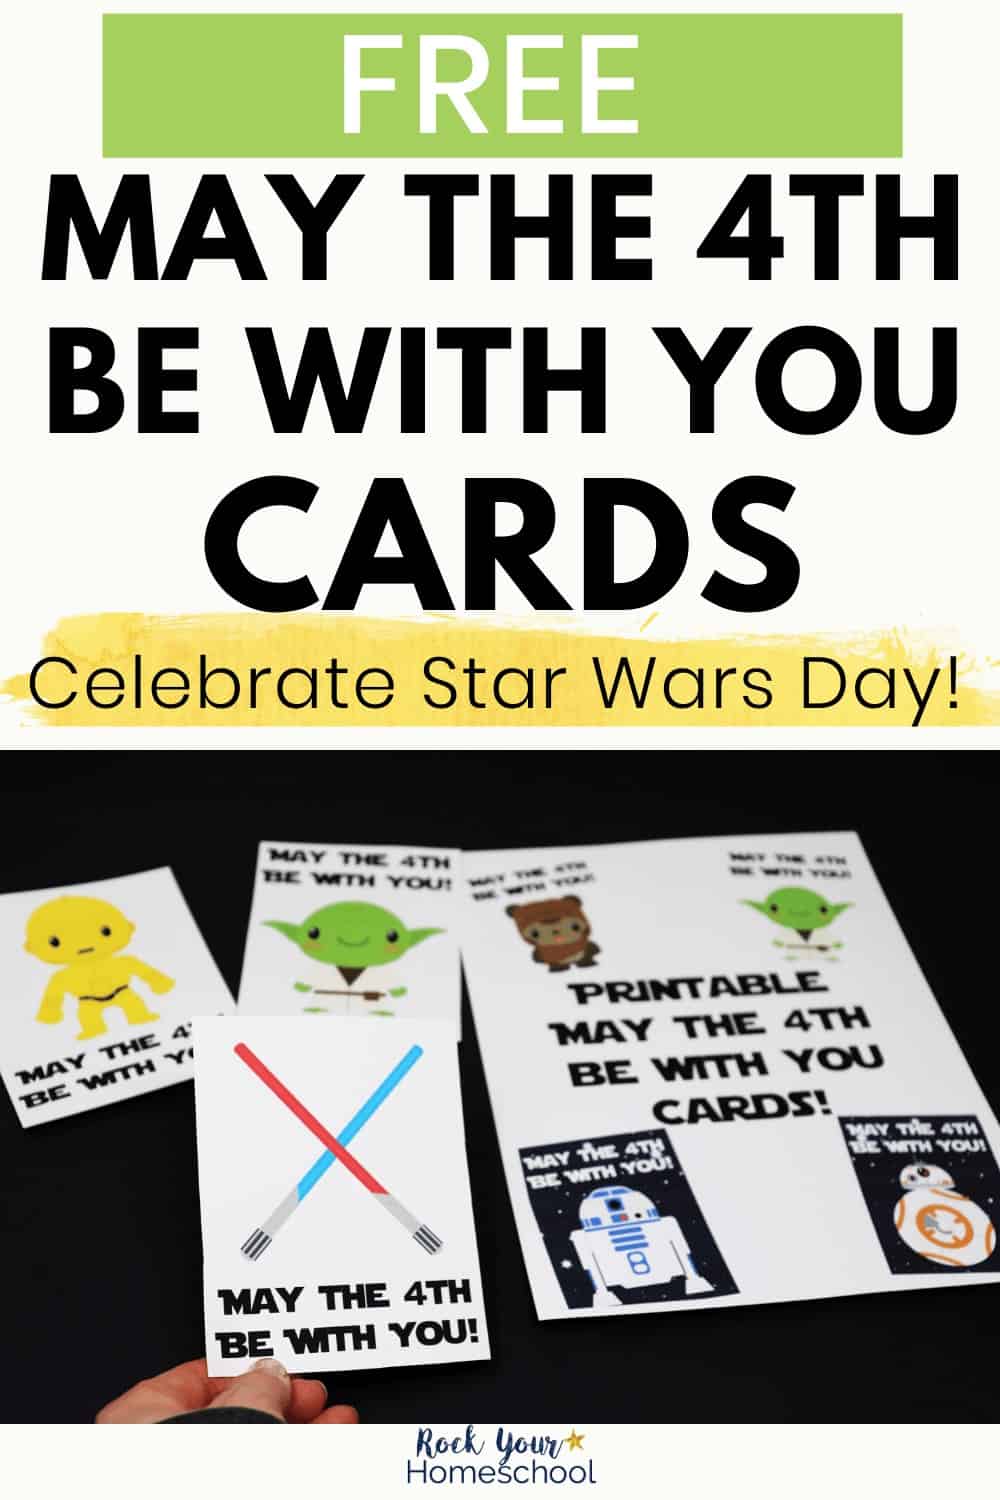 Free Star Wars Cards for May The 4th Be With You